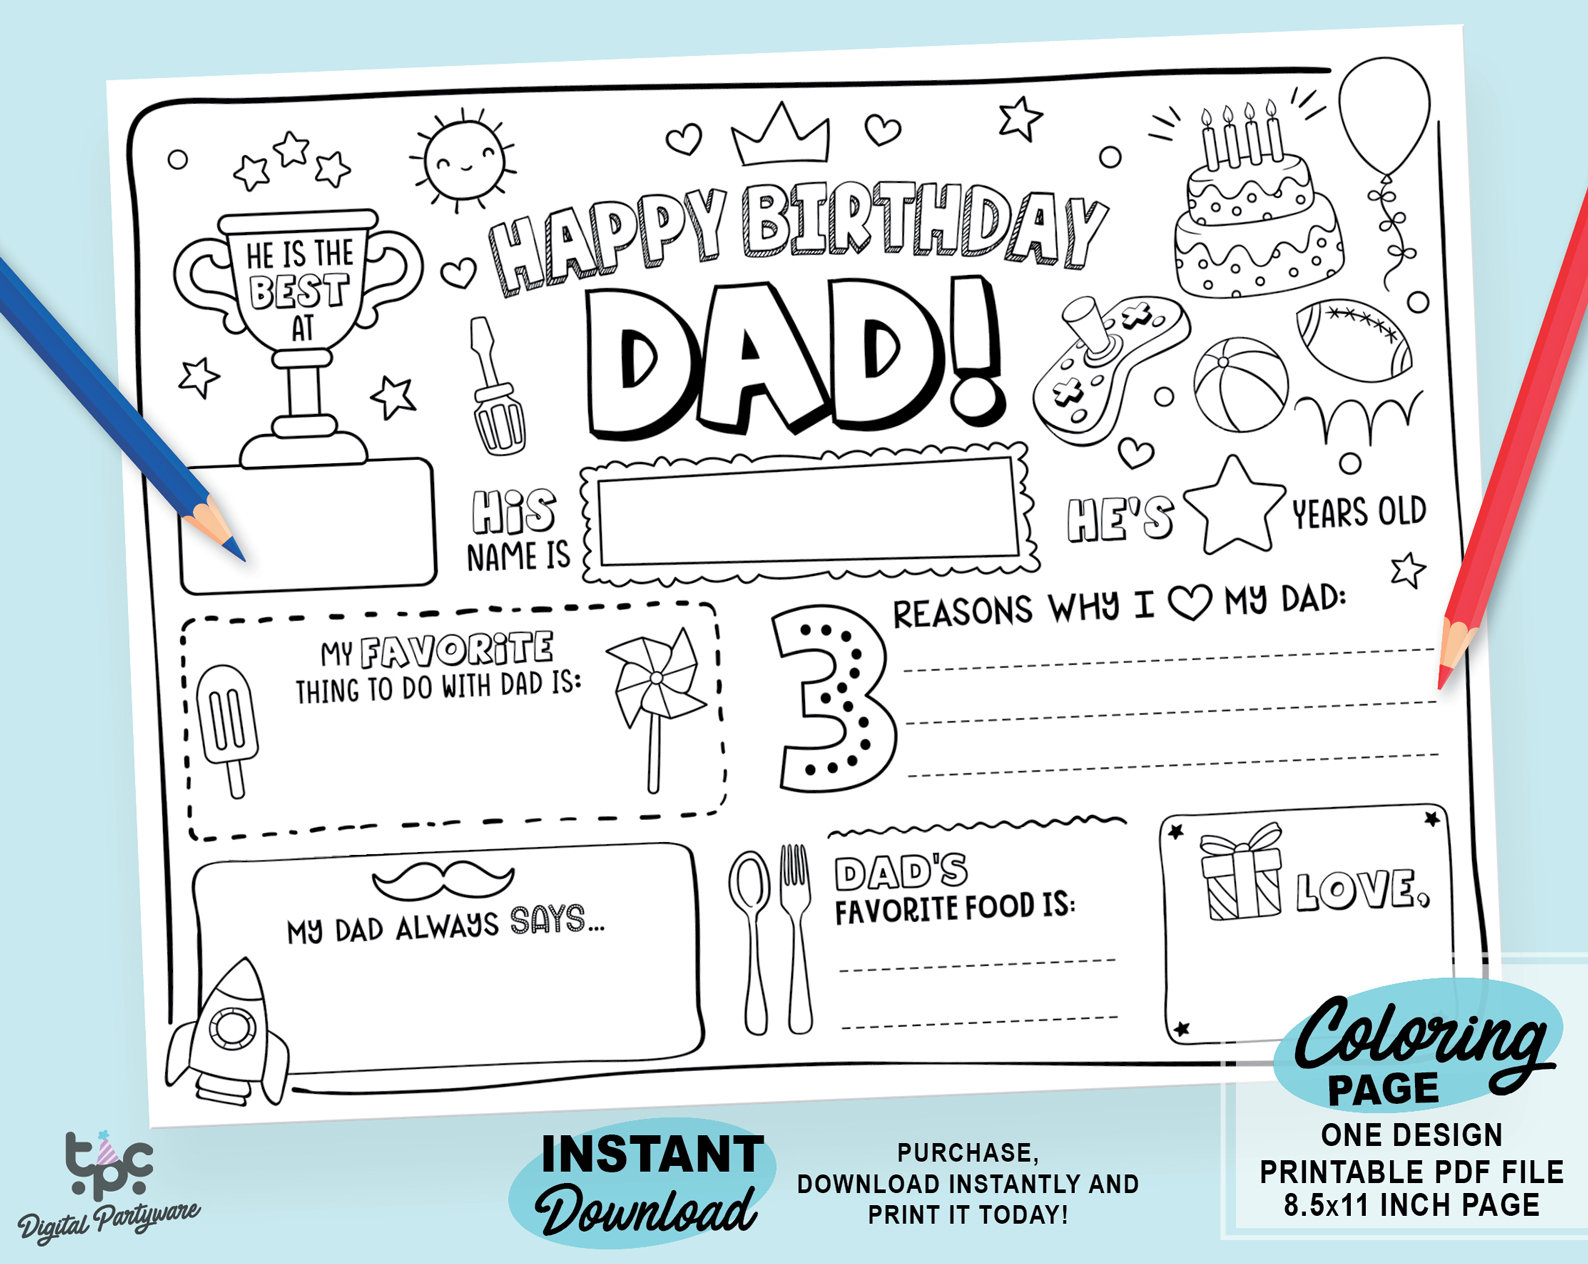 Happy birthday dad coloring page printable all about dad fill in template fathers birthday activity dads birthday printable for kids